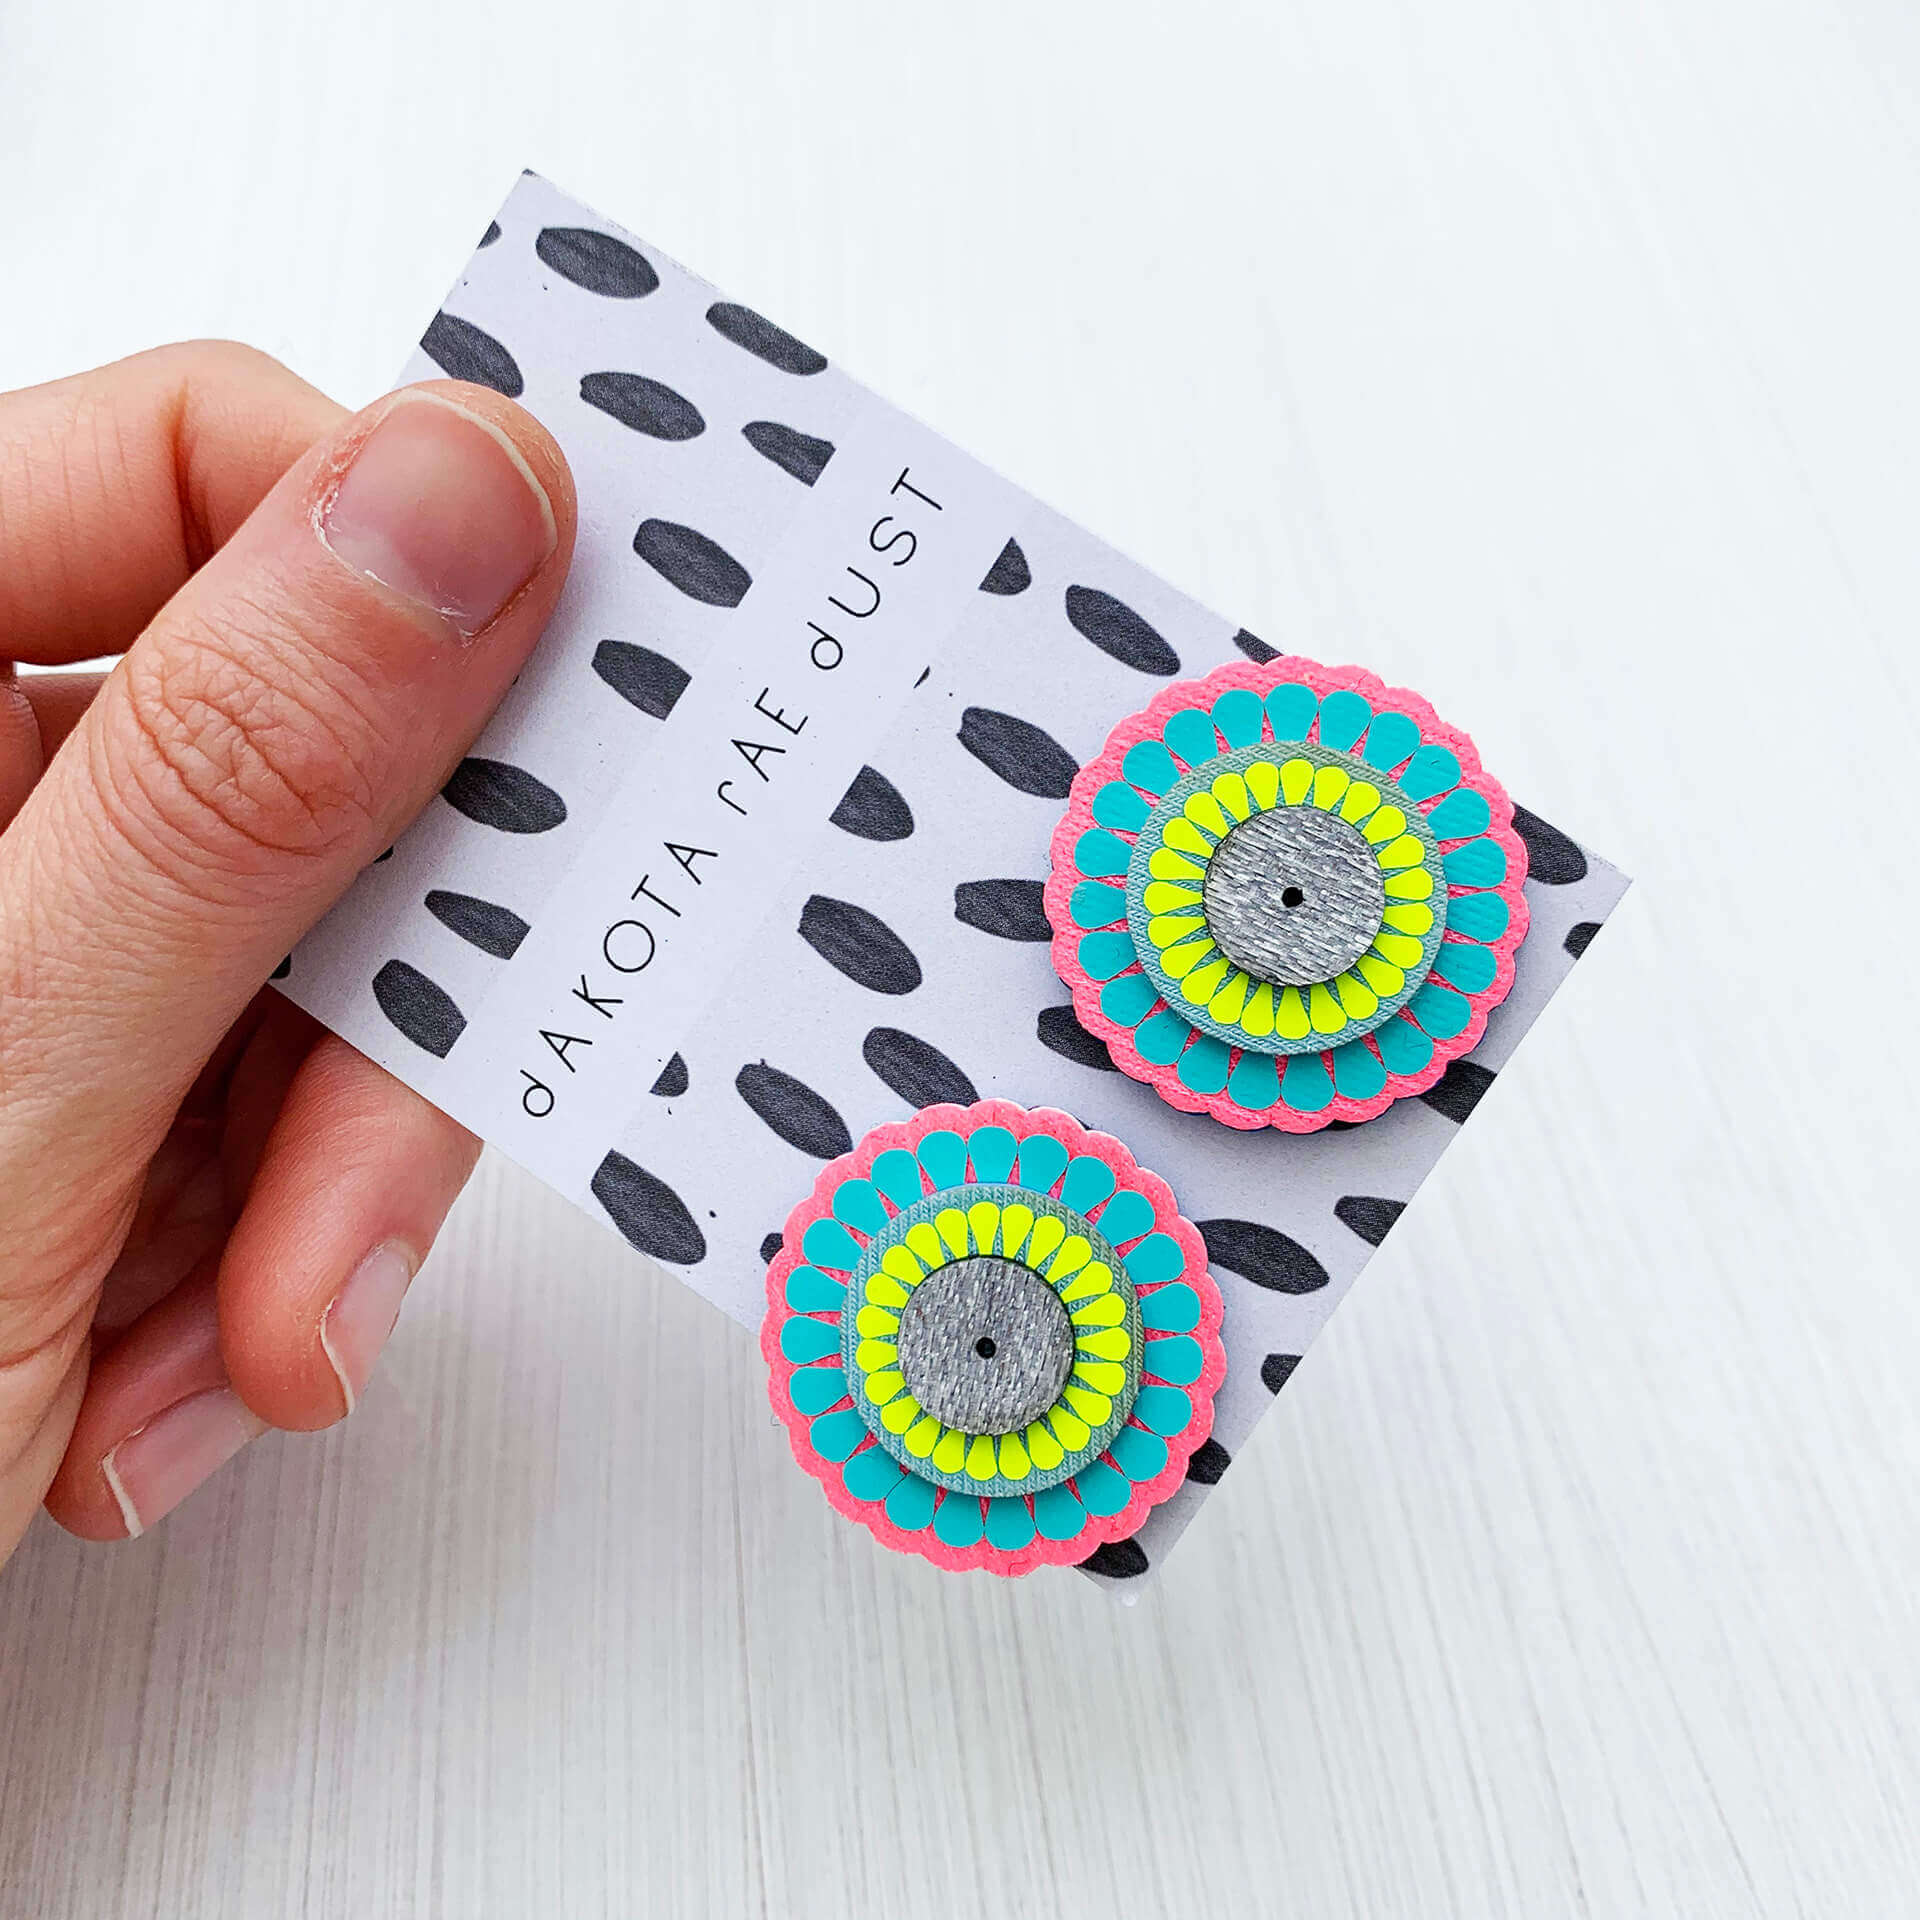 A pair of colourful ornately patterned, oversize studs, backed on a black and white patterned swing tag, printed with a dakota rae dust logo are held in a woman's hand. Only the thumb and fingers are visible. The background is plain off white. The studs are circle shapes in turquoise, pink and yellow.